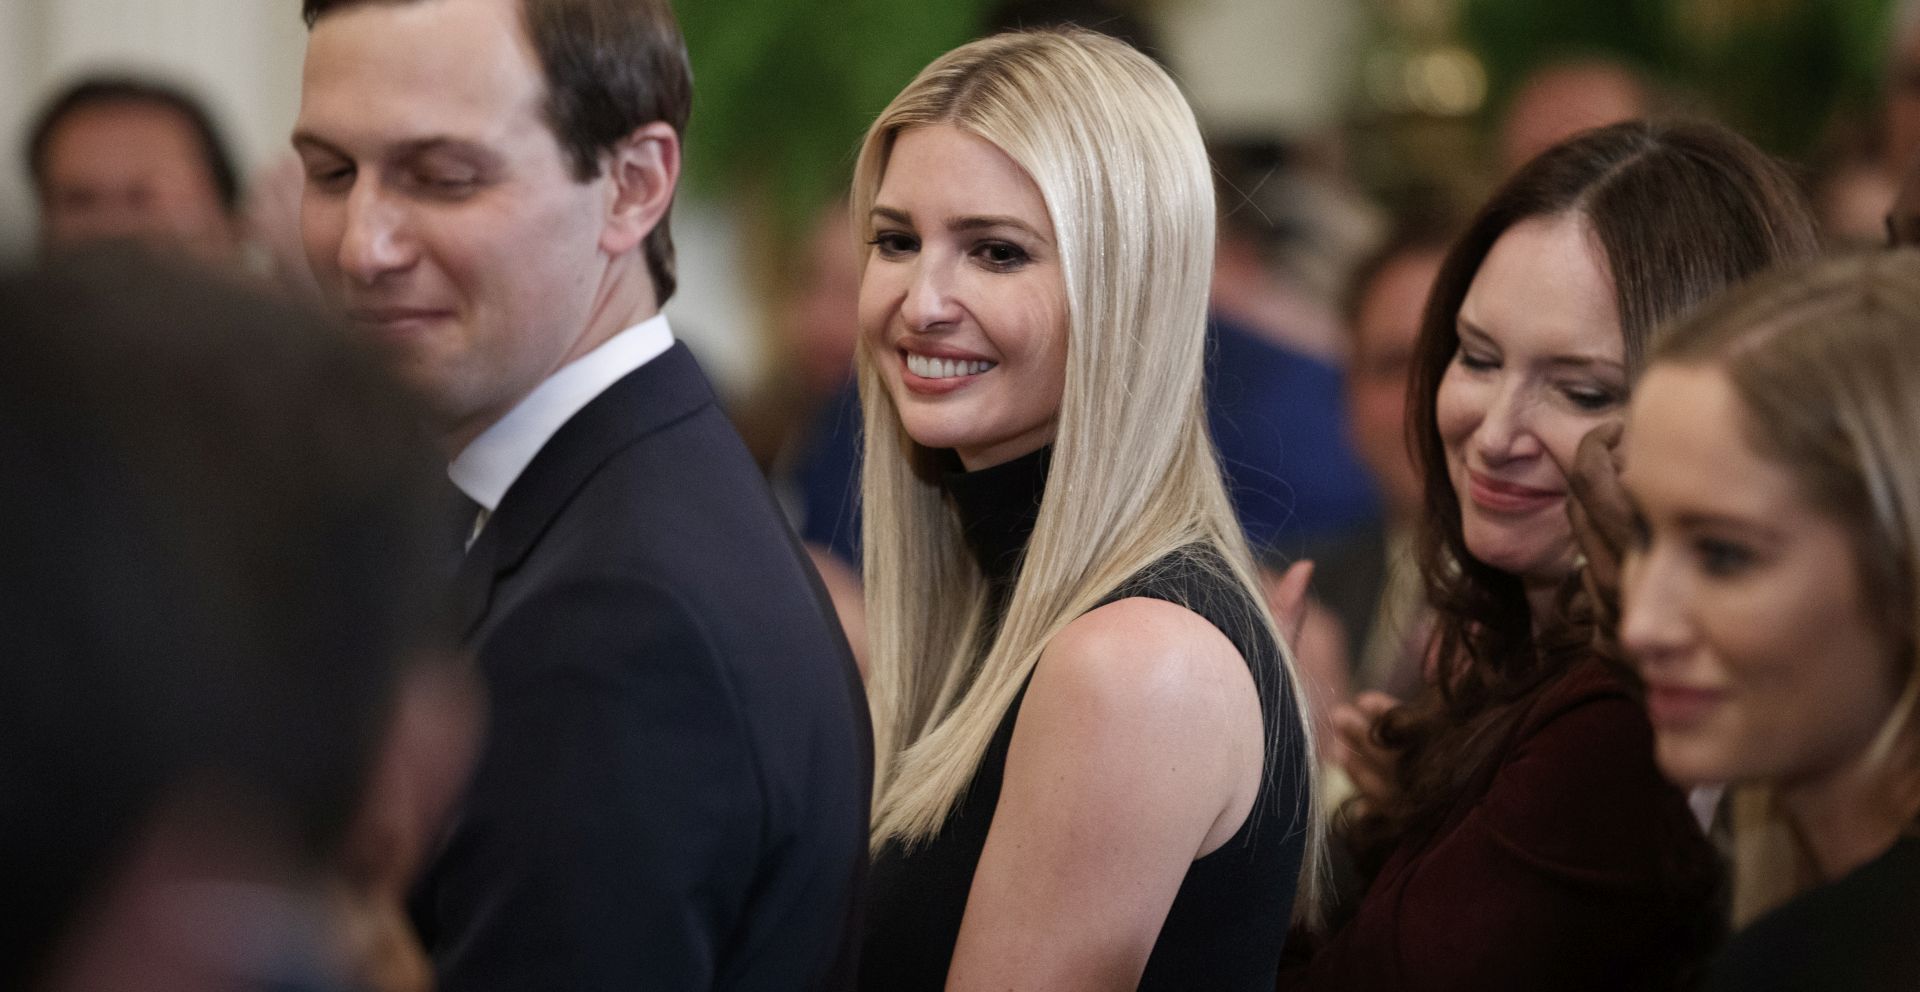 epa07479284 Ivanka Trump (C) participates in the 2019 Prison Reform Summit and First Step Act Celebration in the East Room at the White House in Washington, DC, USA, 01 April 2019. The First Step Act passed with overwhelming bipartisan support by Congress in December made the 2010 Fair Sentencing Act, that did not apply to those already serving time, retroactive.  EPA/SHAWN THEW